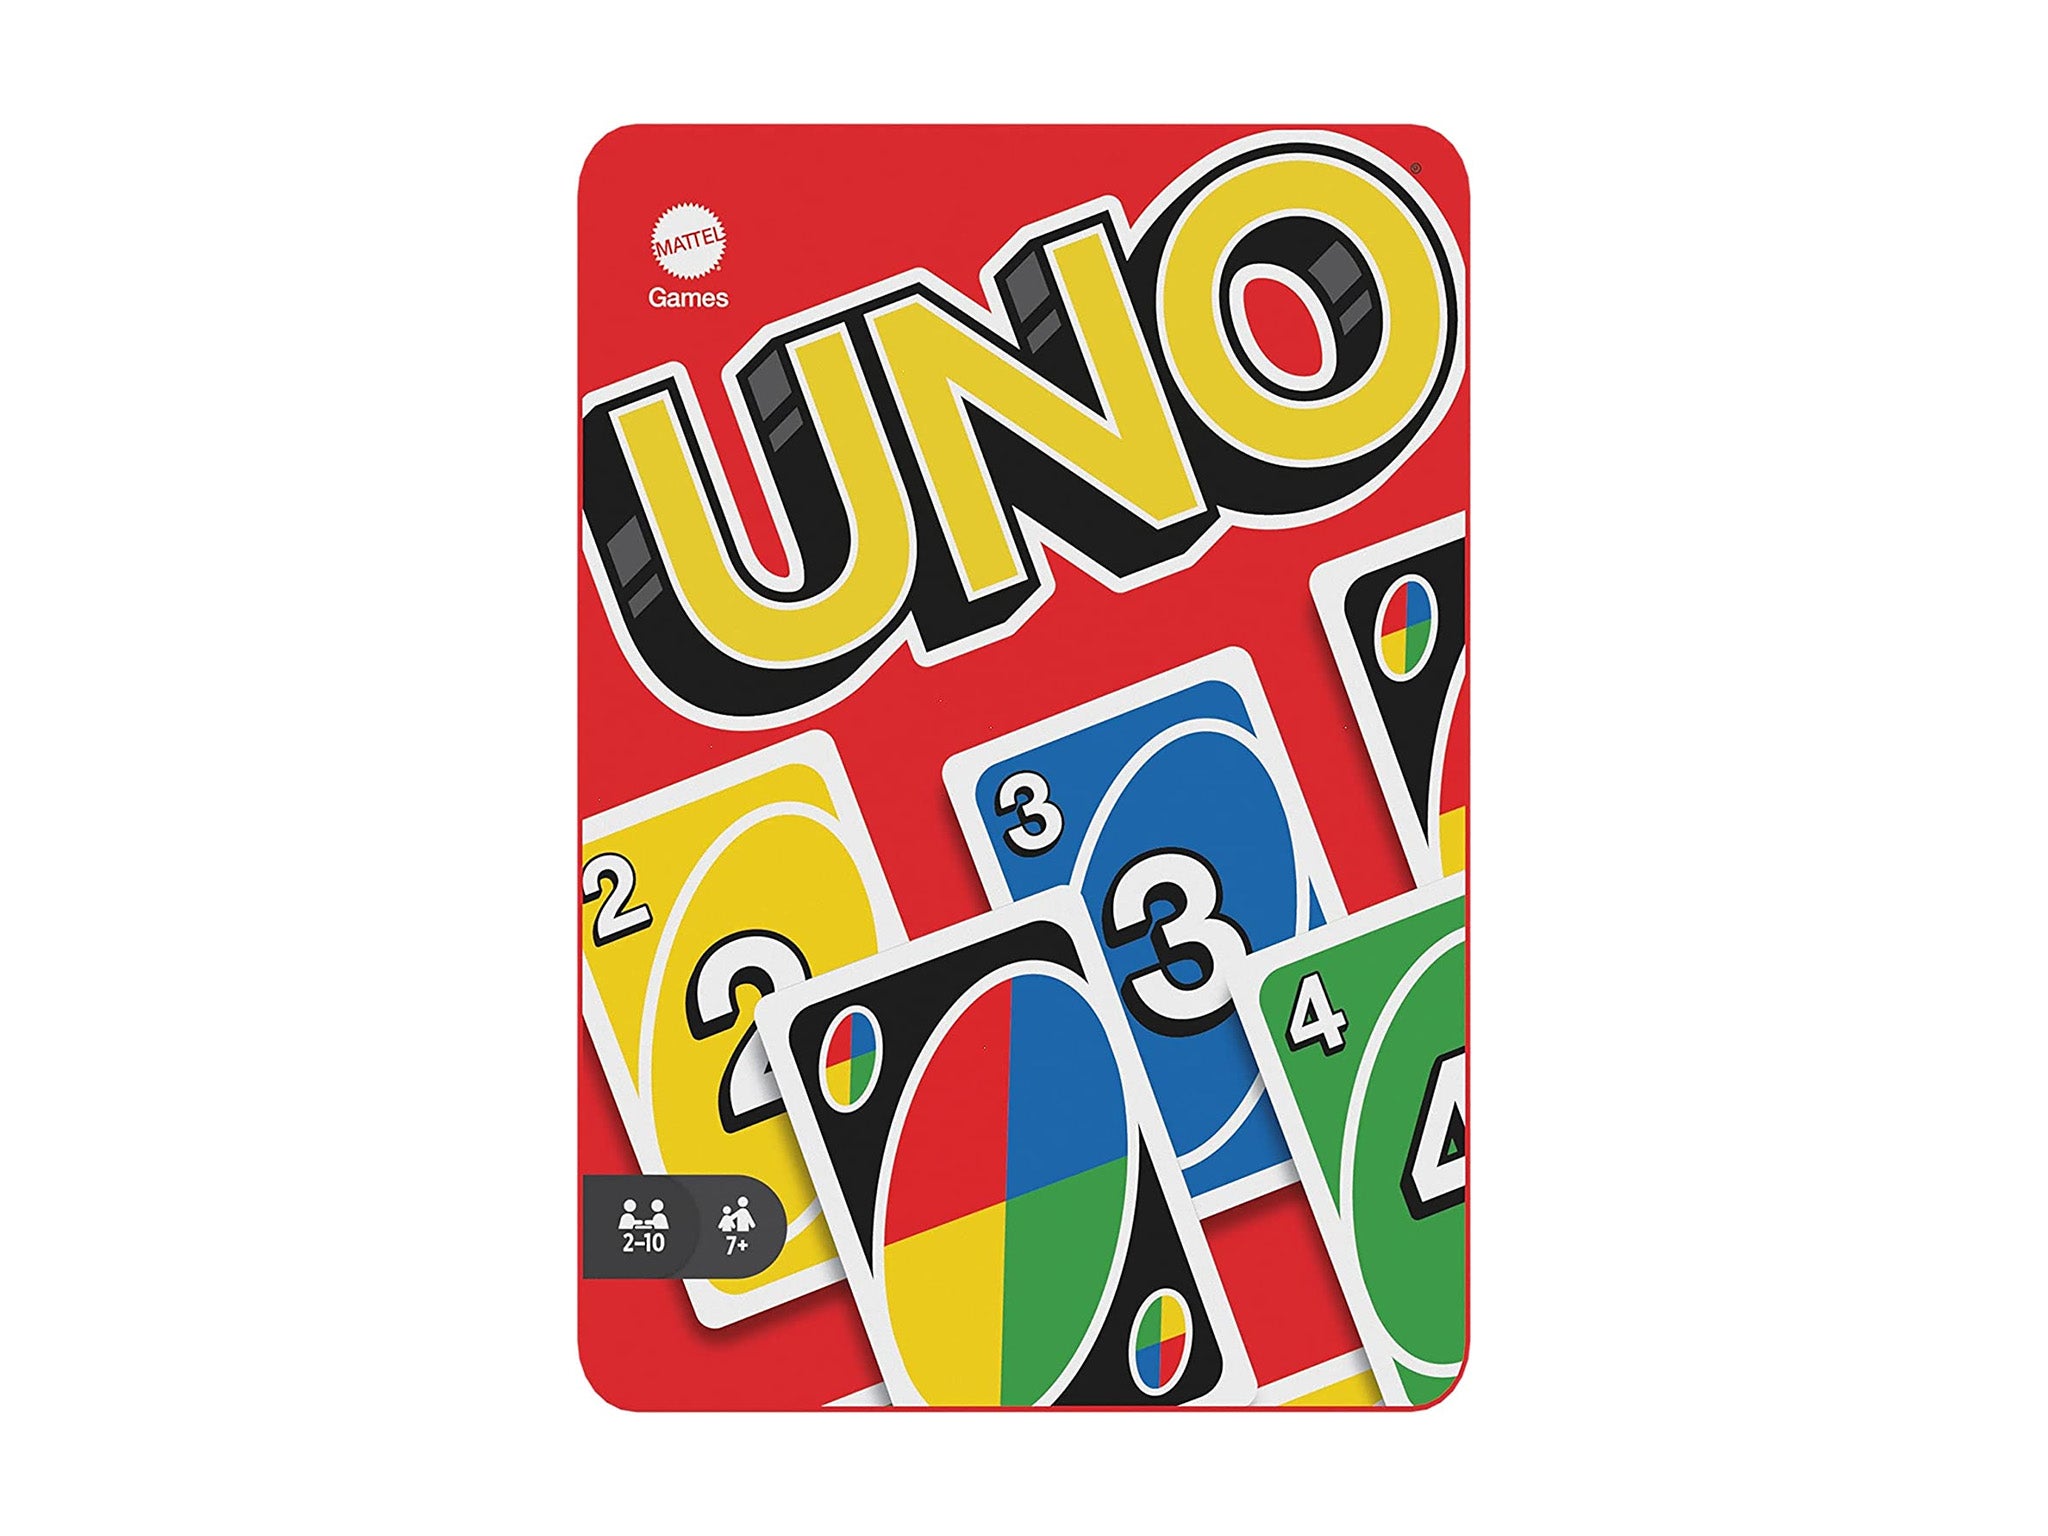 UNO is paying over $17,000 per day for a chief player to help